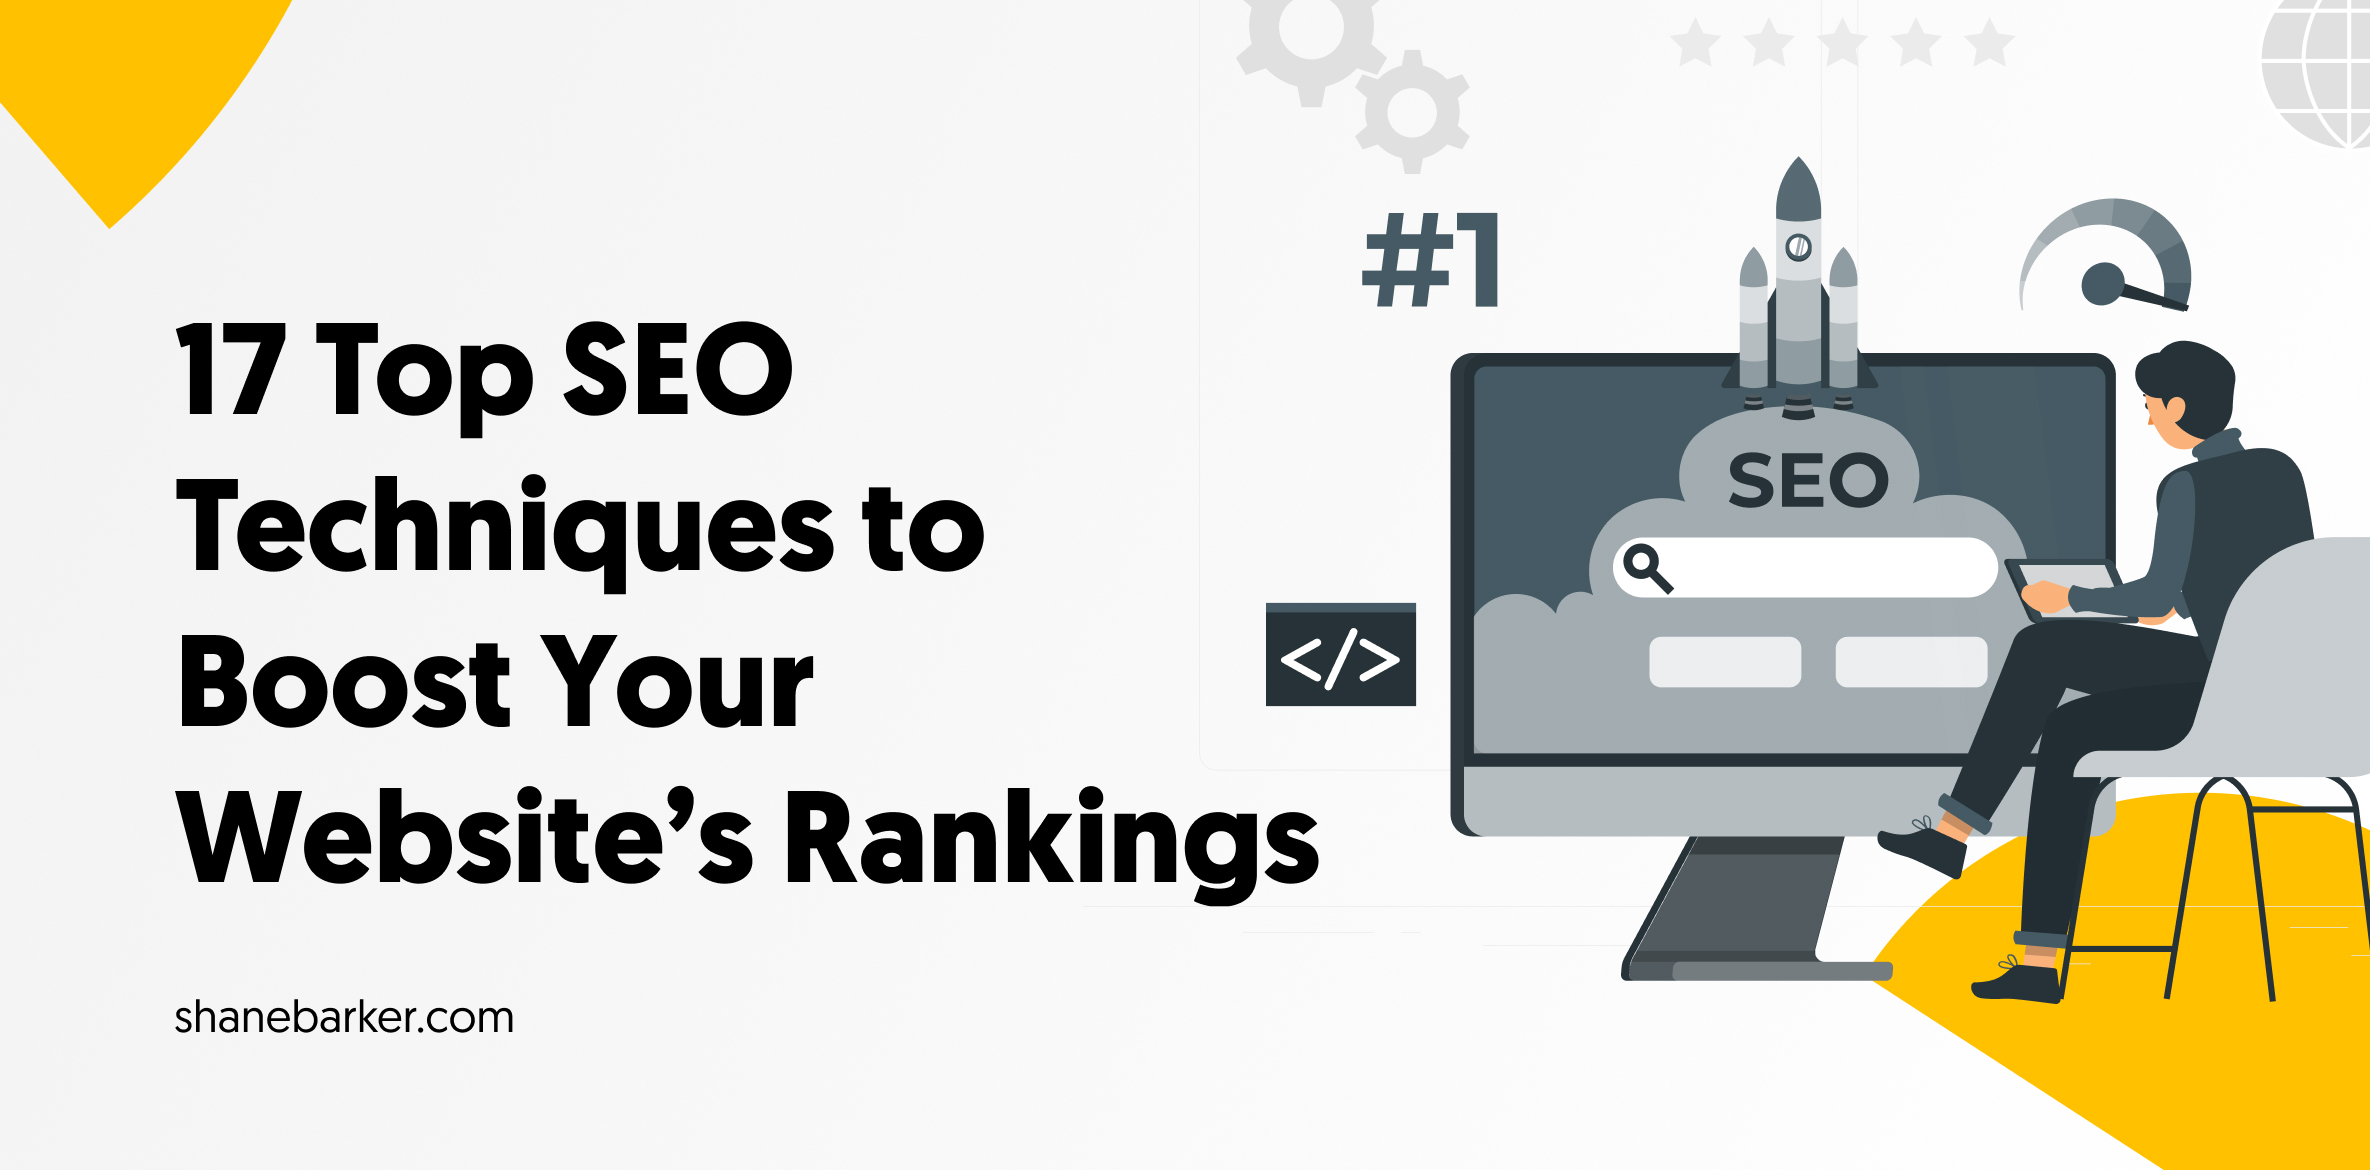 17 Top SEO Techniques to Boost Your Website’s Rankings in 2022